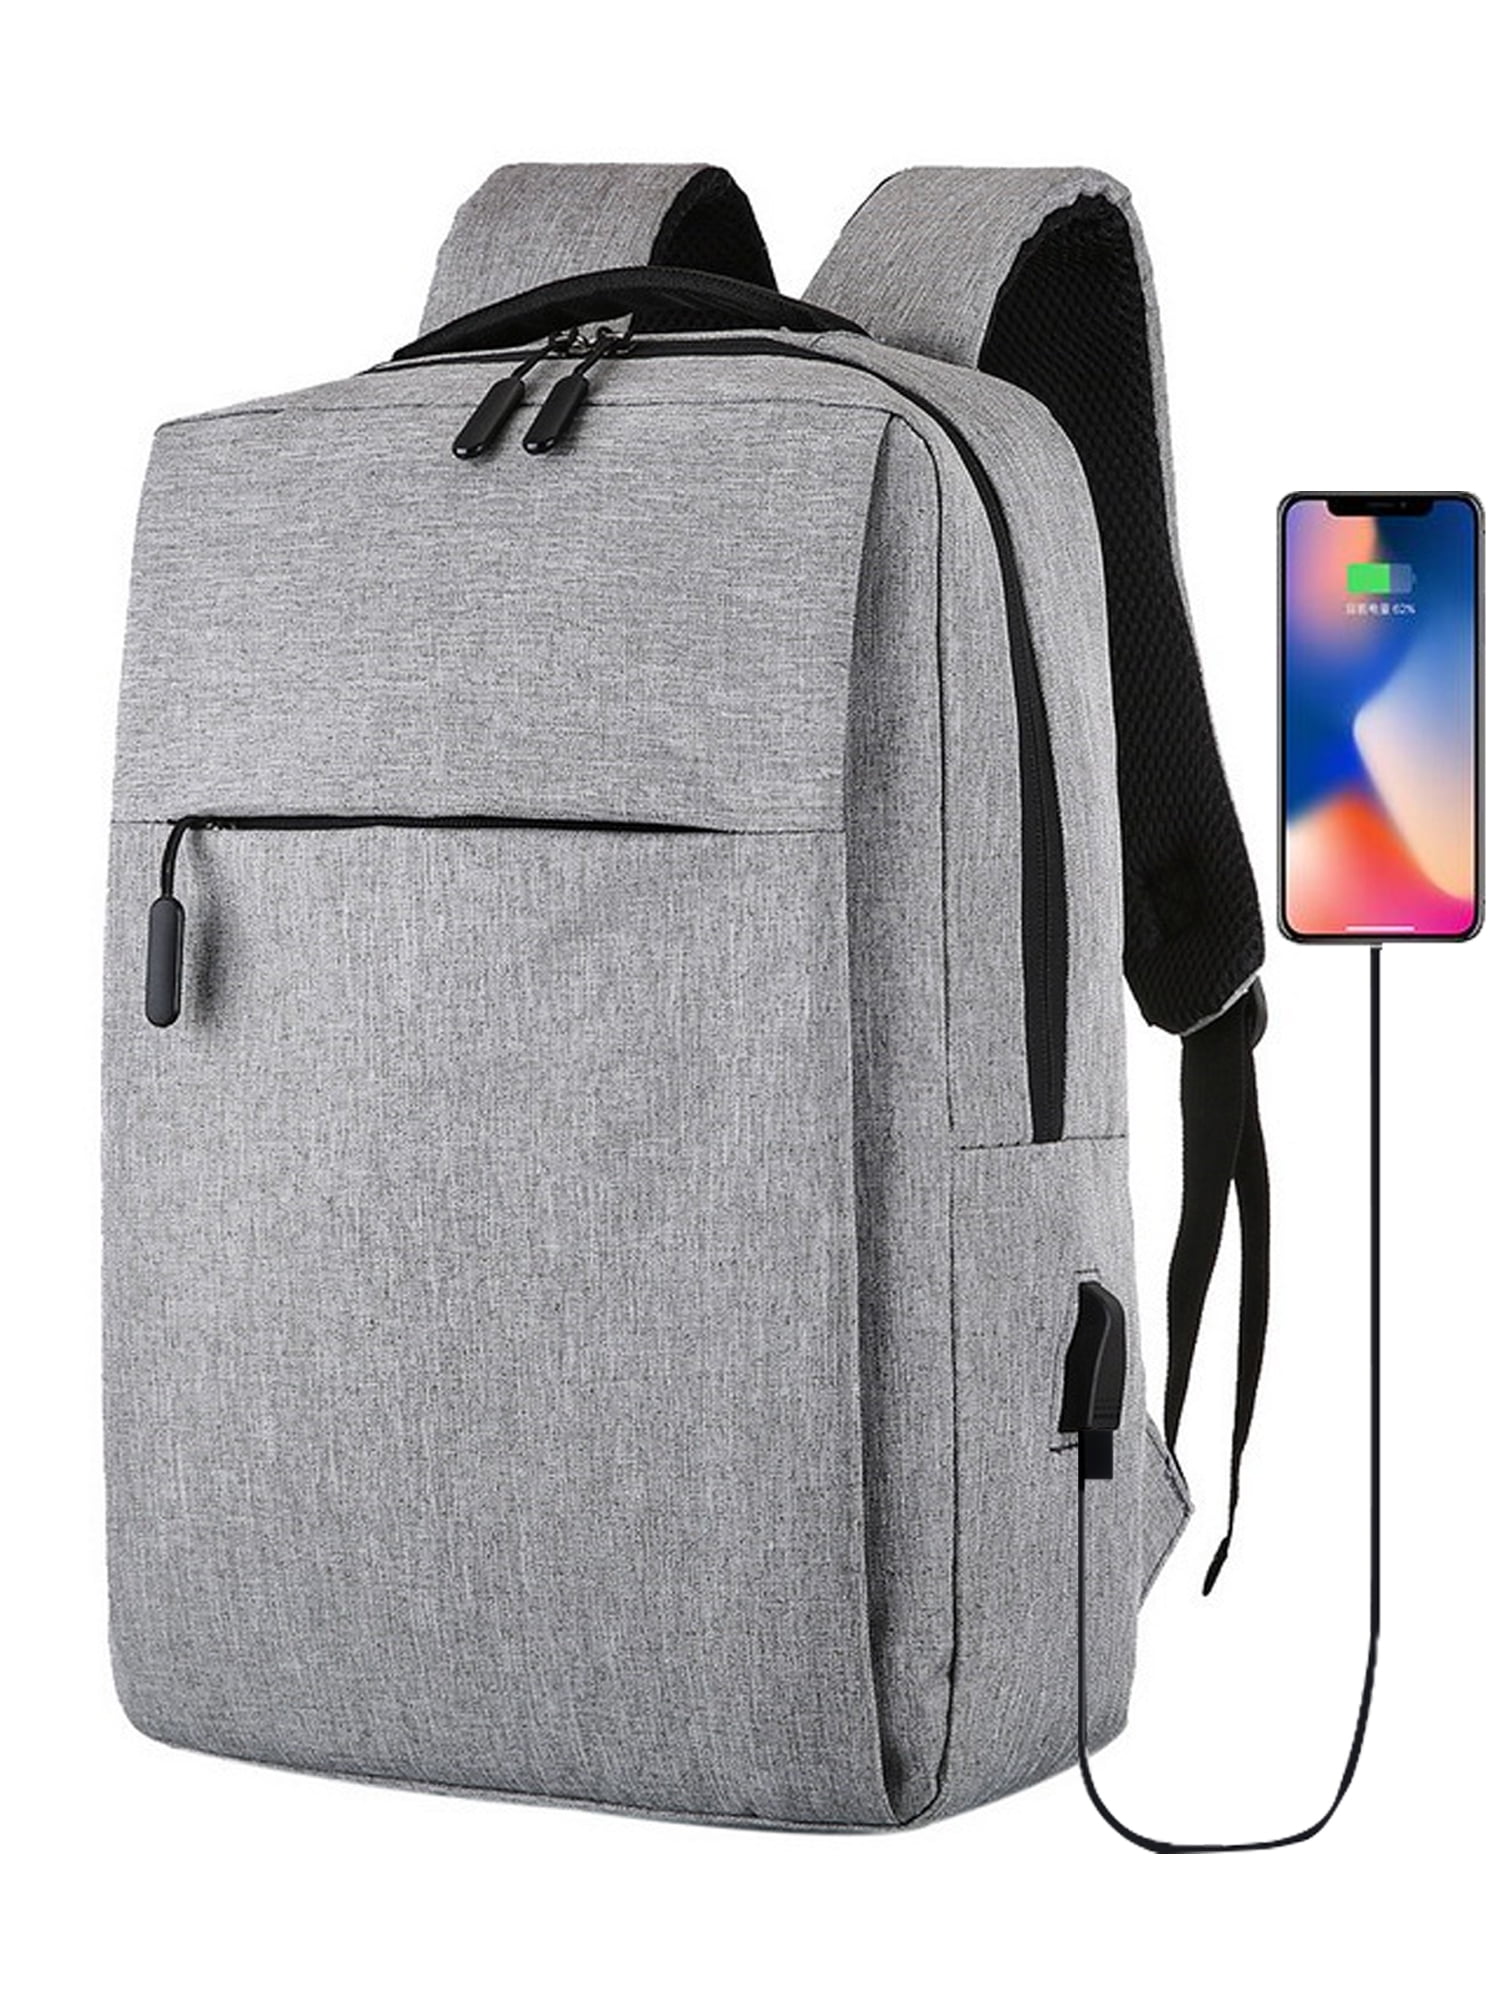 Lvelia Travel Laptop Backpack, Business Slim Durable Backpack with